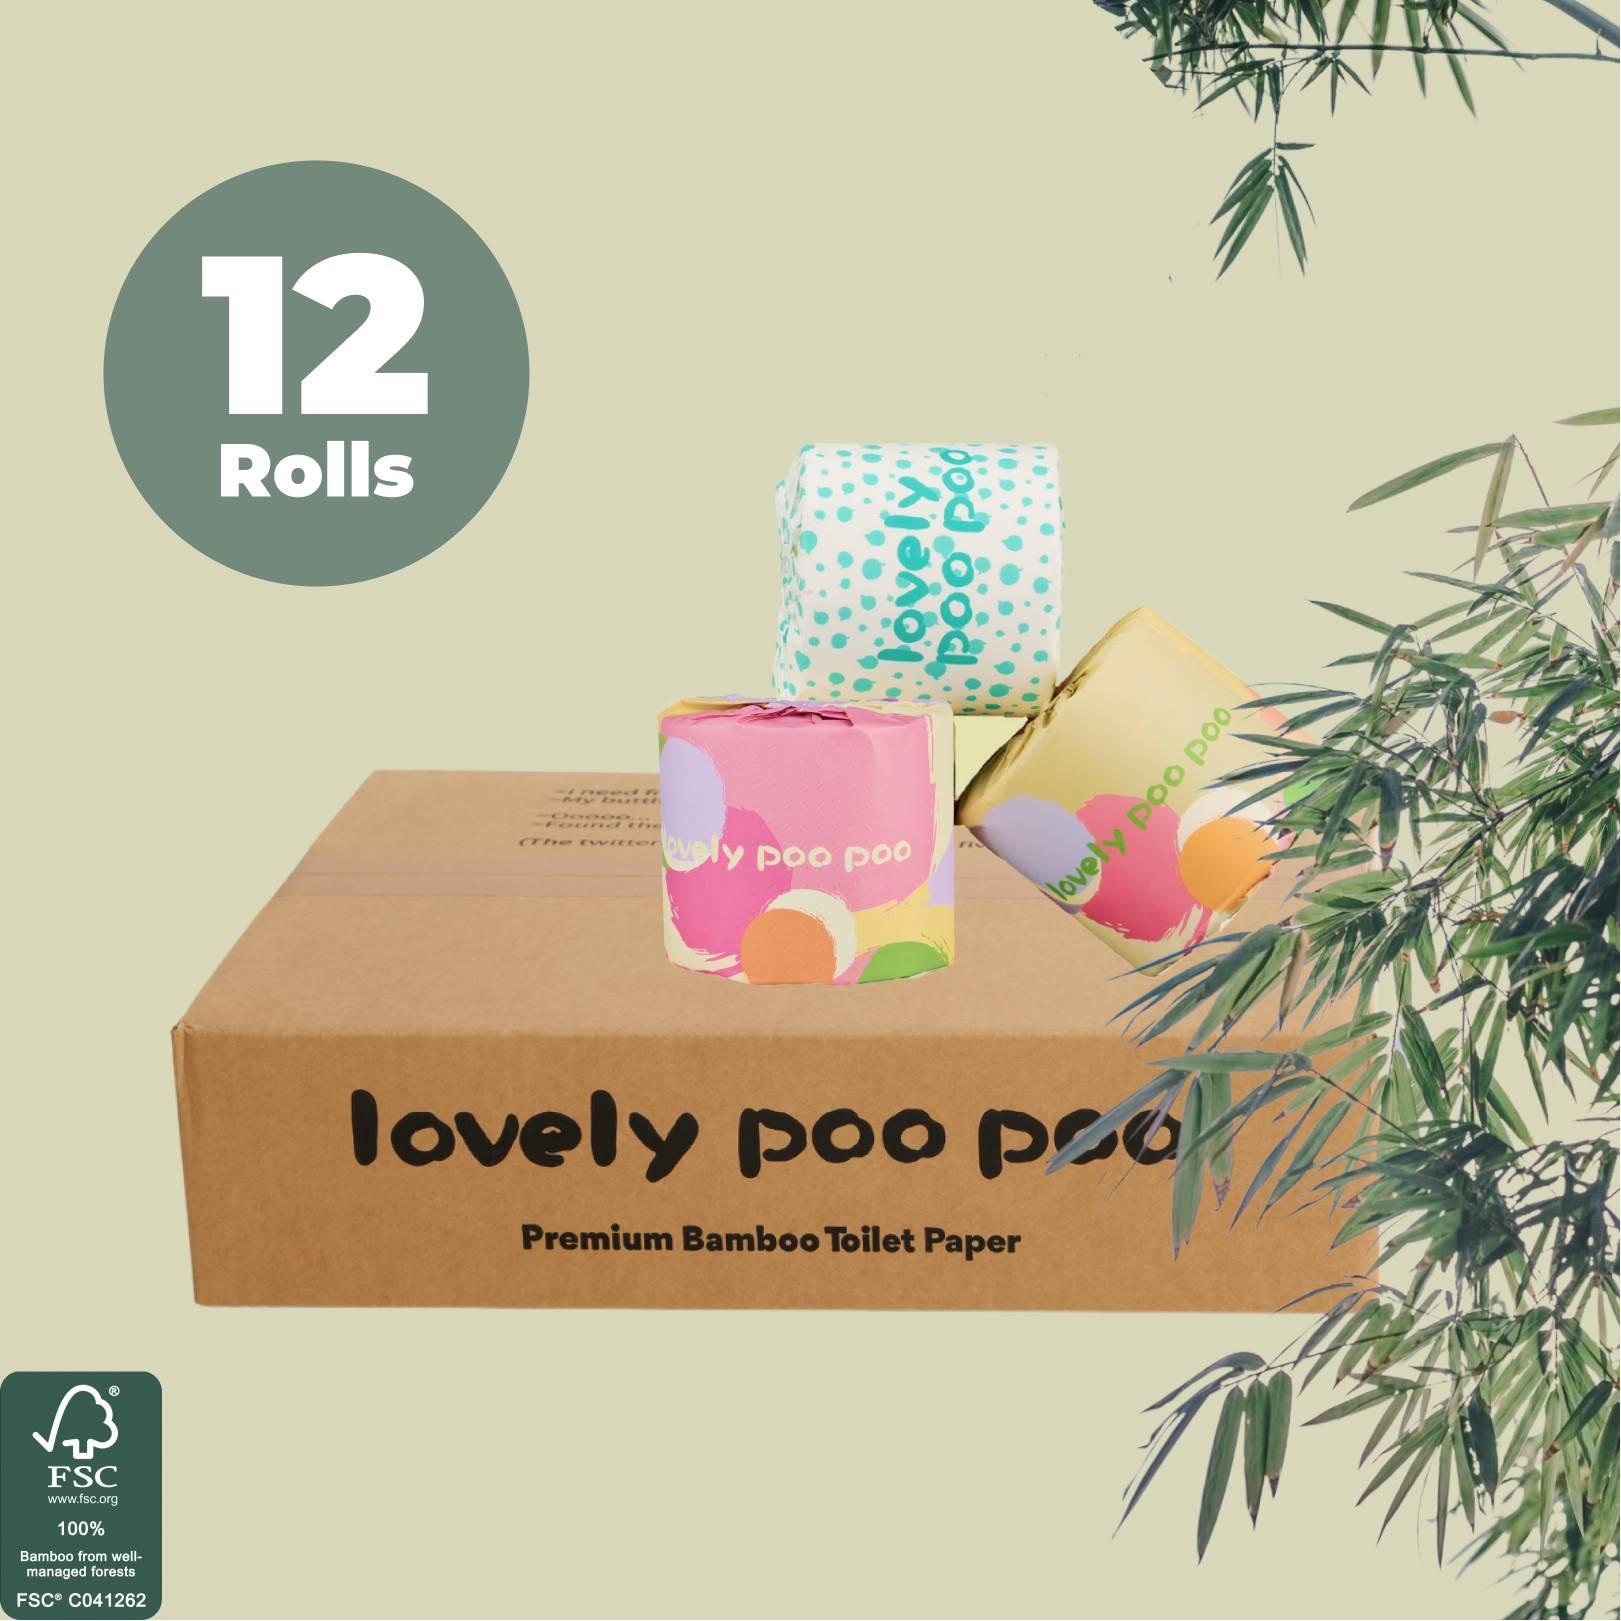 Tree-free Bamboo Toilet Paper - Lovely Poo Poo